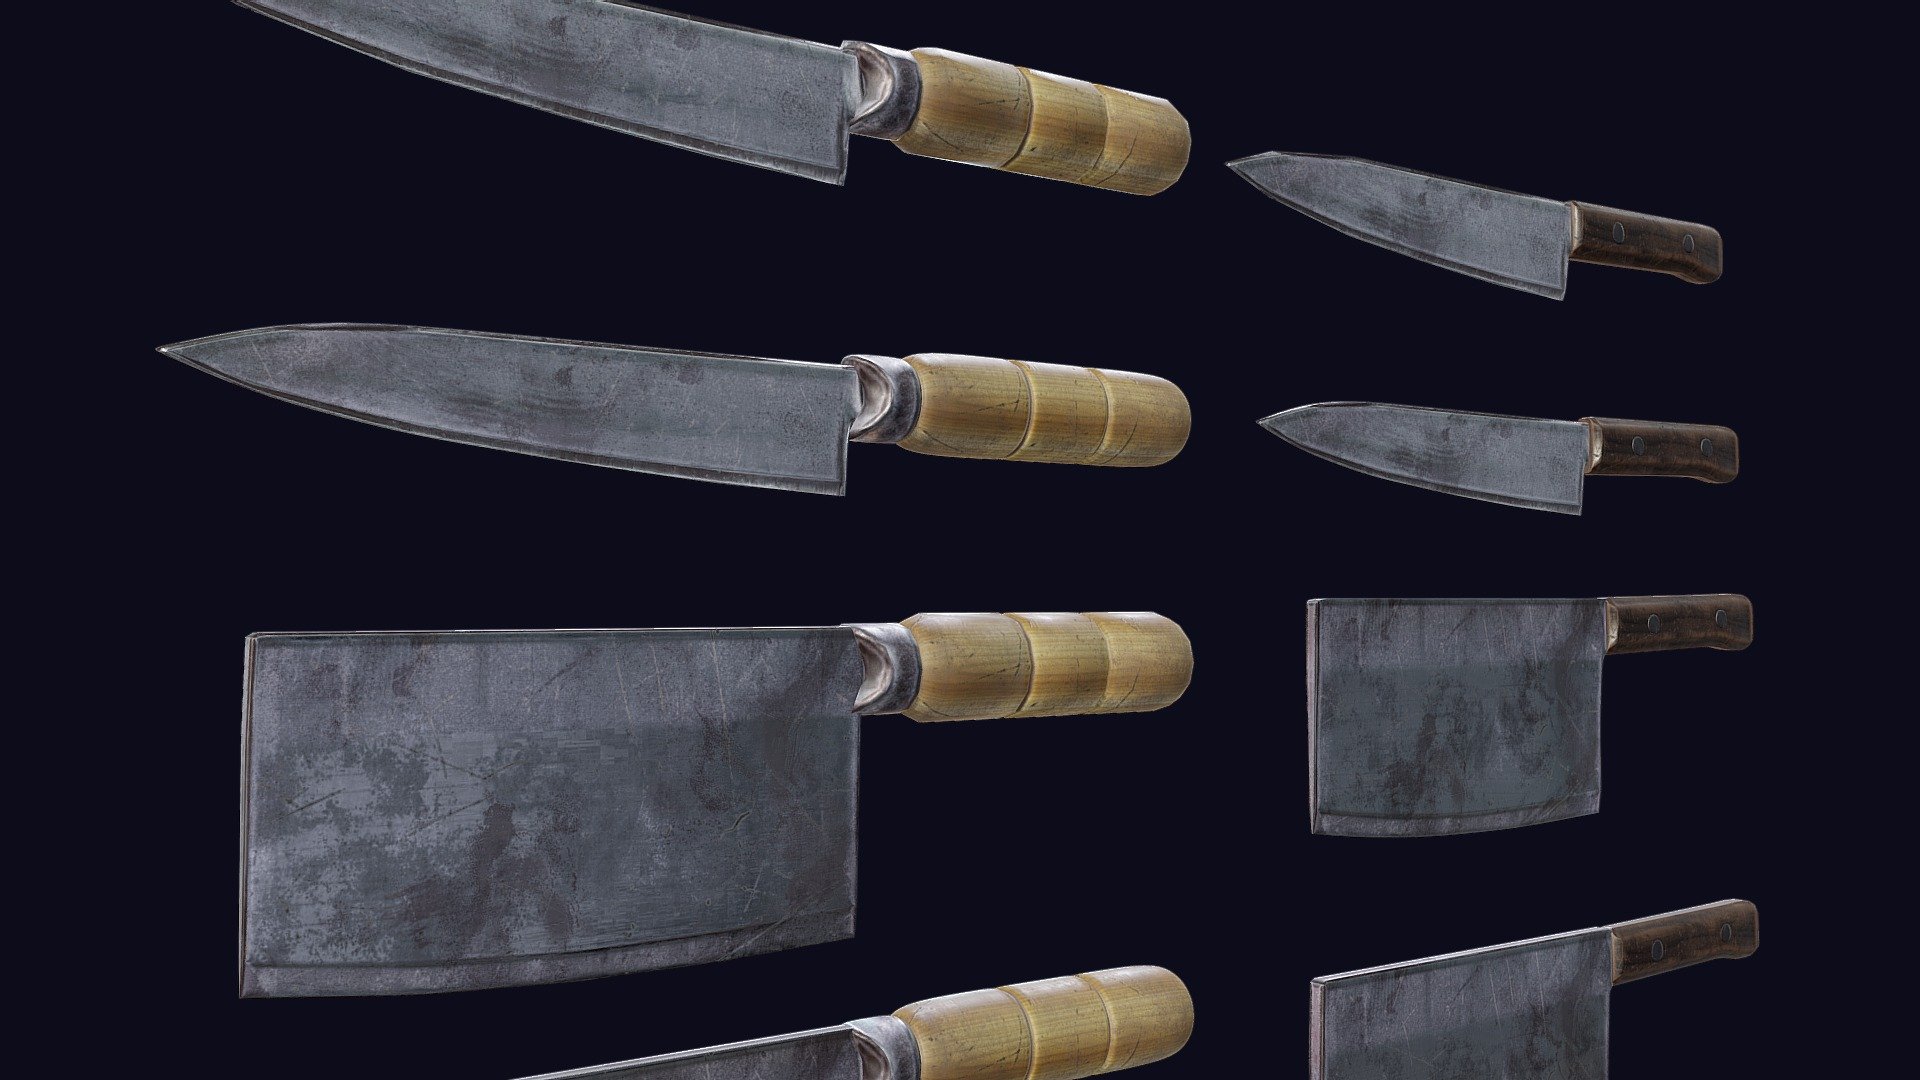 Cleaver and Knife PBR Game Ready Low Poly 3d model ready for Virtual Reality (VR), Augmented Reality (AR), games and other real-time apps.  Available @ -link removed- - Cleaver & Knife PBR Game Ready - Buy Royalty Free 3D model by artssionate 3d model